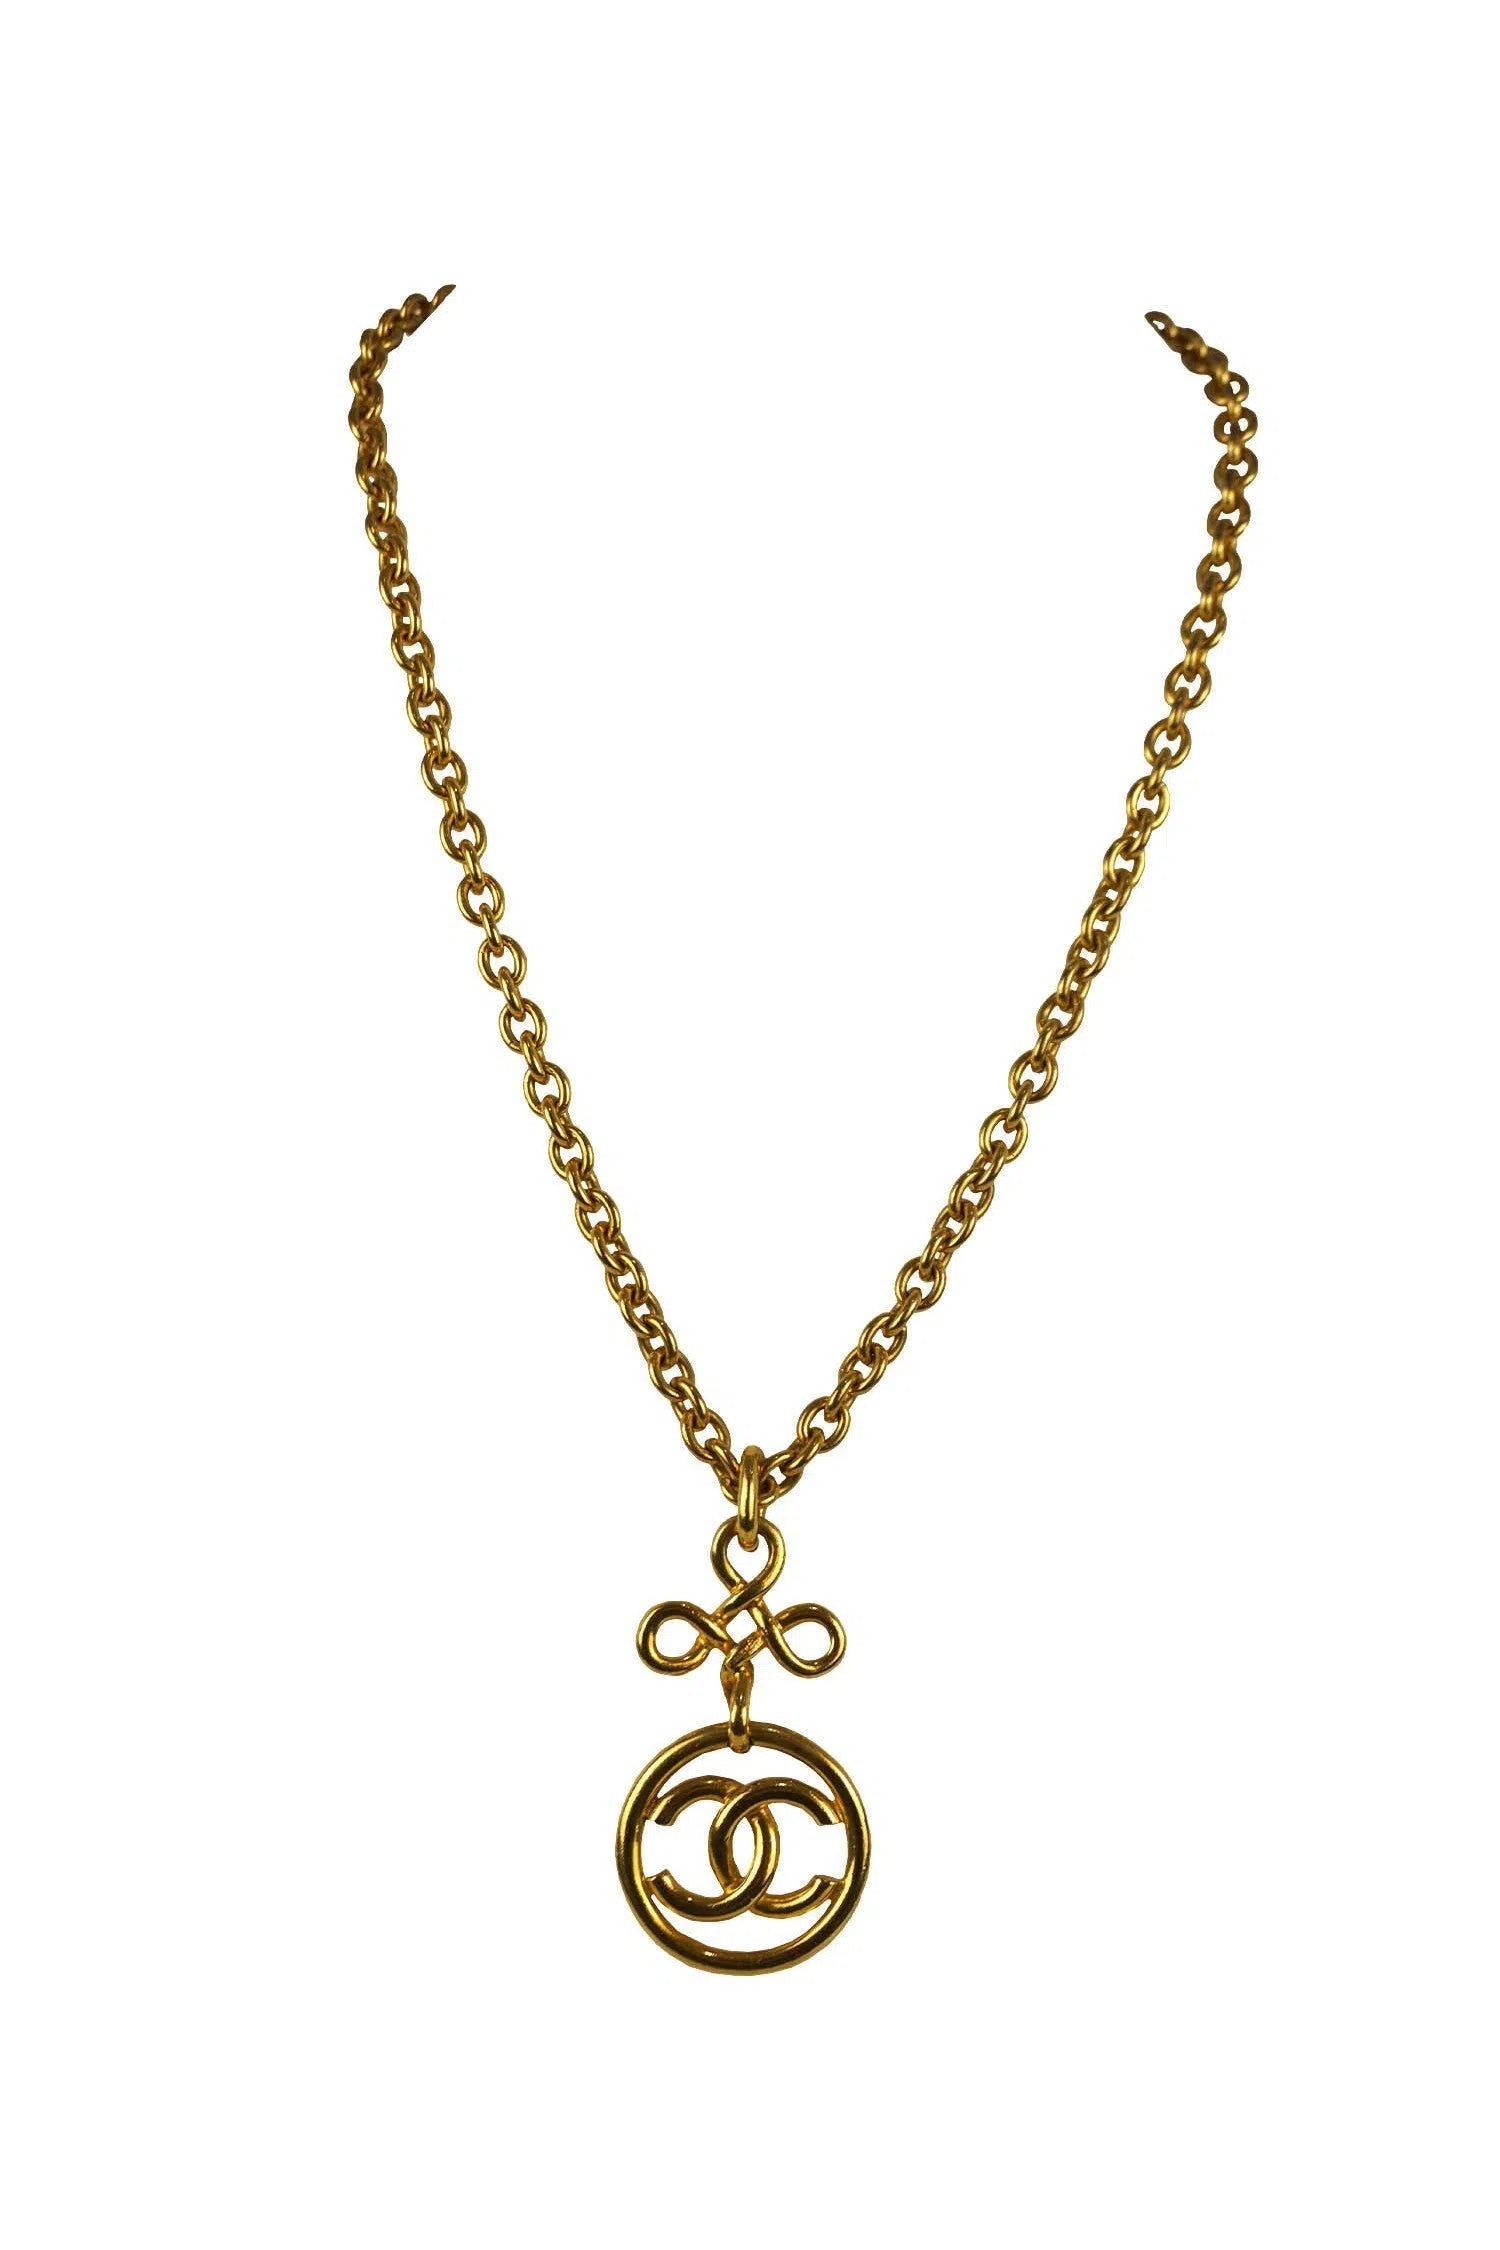 Chanel Vintage Twisted Cross CC Pendant Necklace 1993 - Foxy Couture Carmel